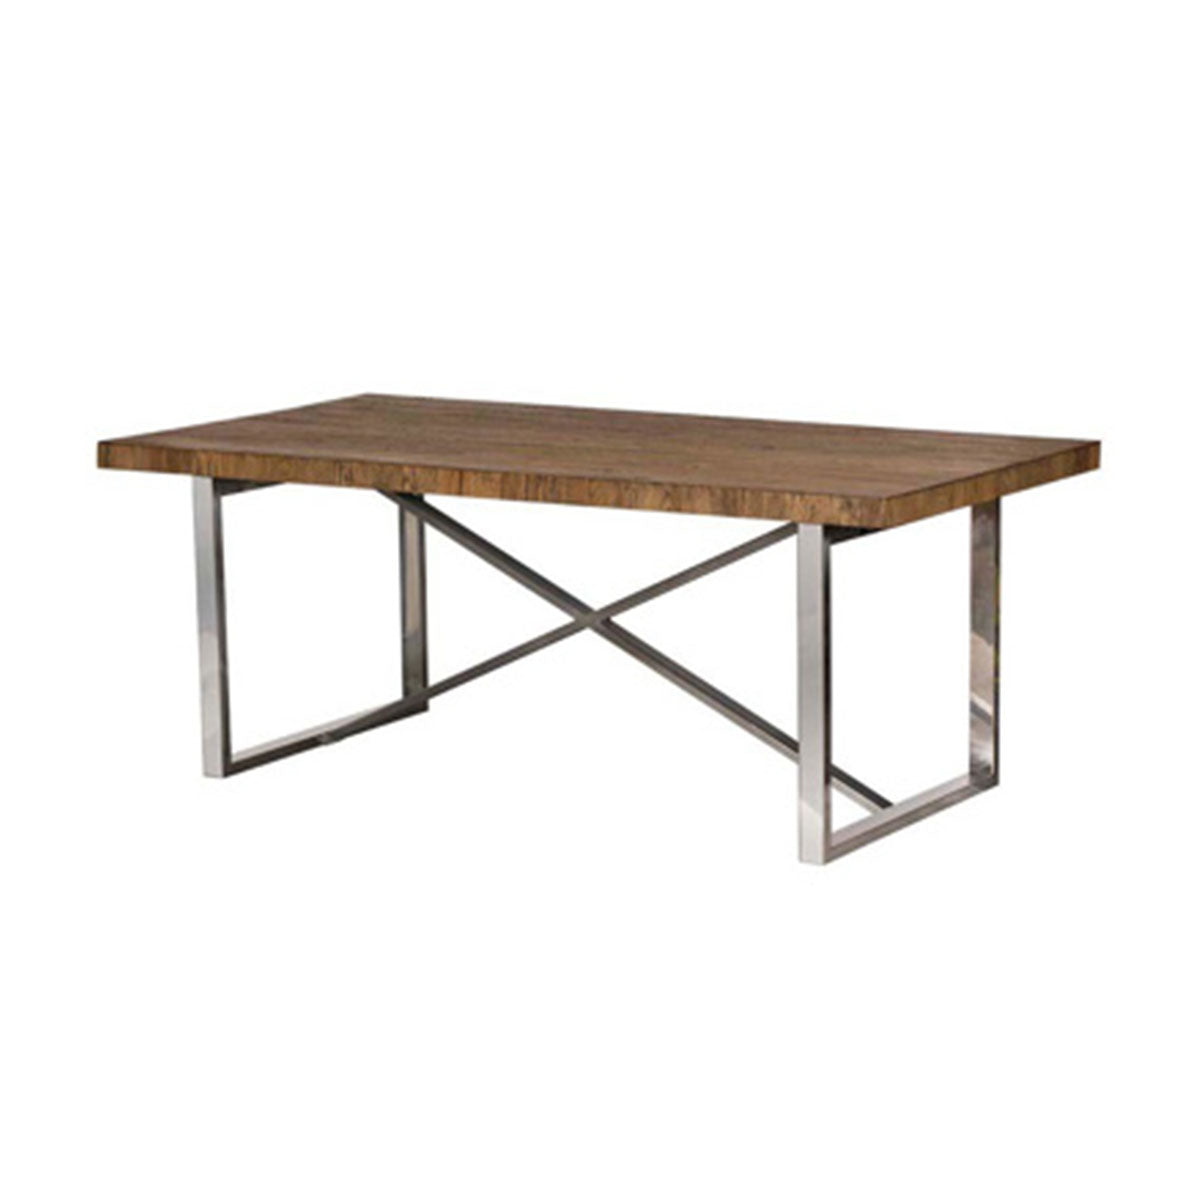 Natural Oak Wooden Dining Table Various Sizes